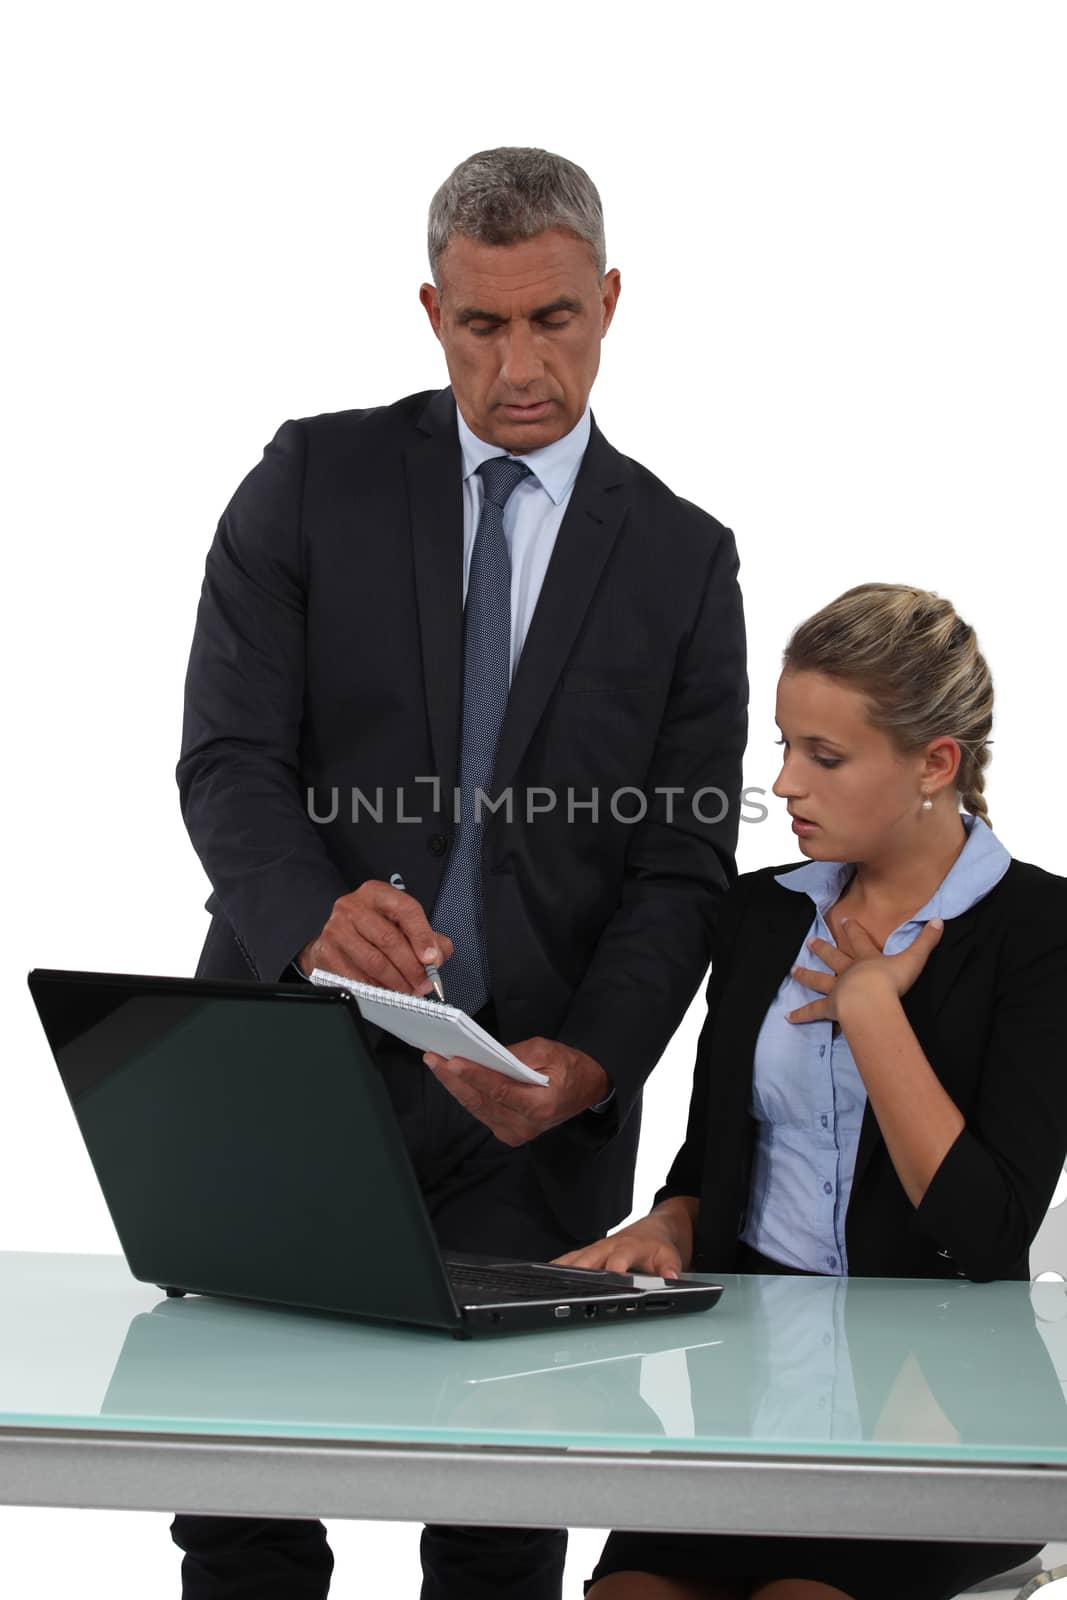 Boss handing note to young assistant